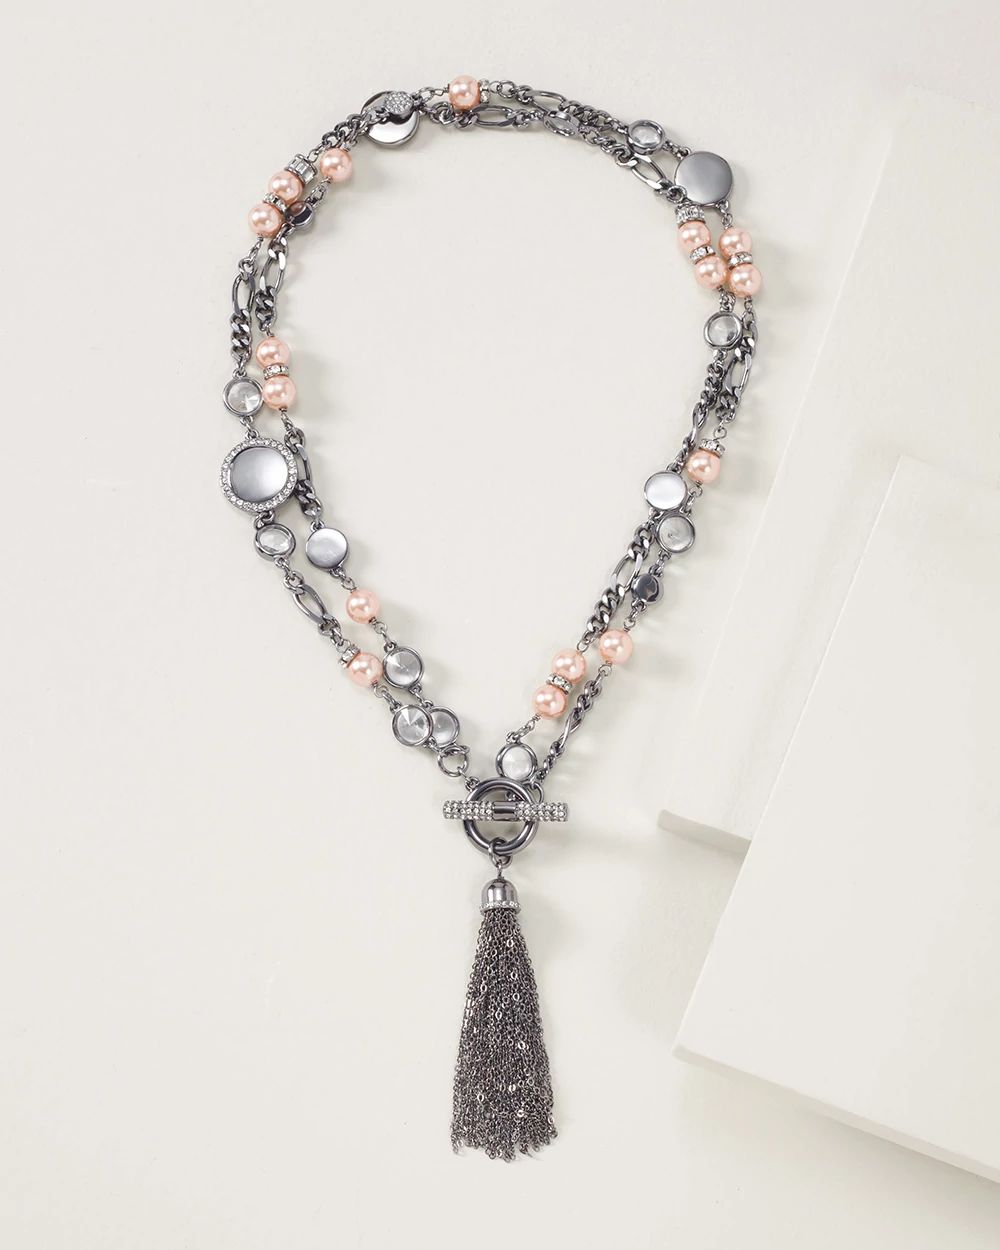 Hematite & Pink Pearl Convertible Tassel Necklace click to view larger image.